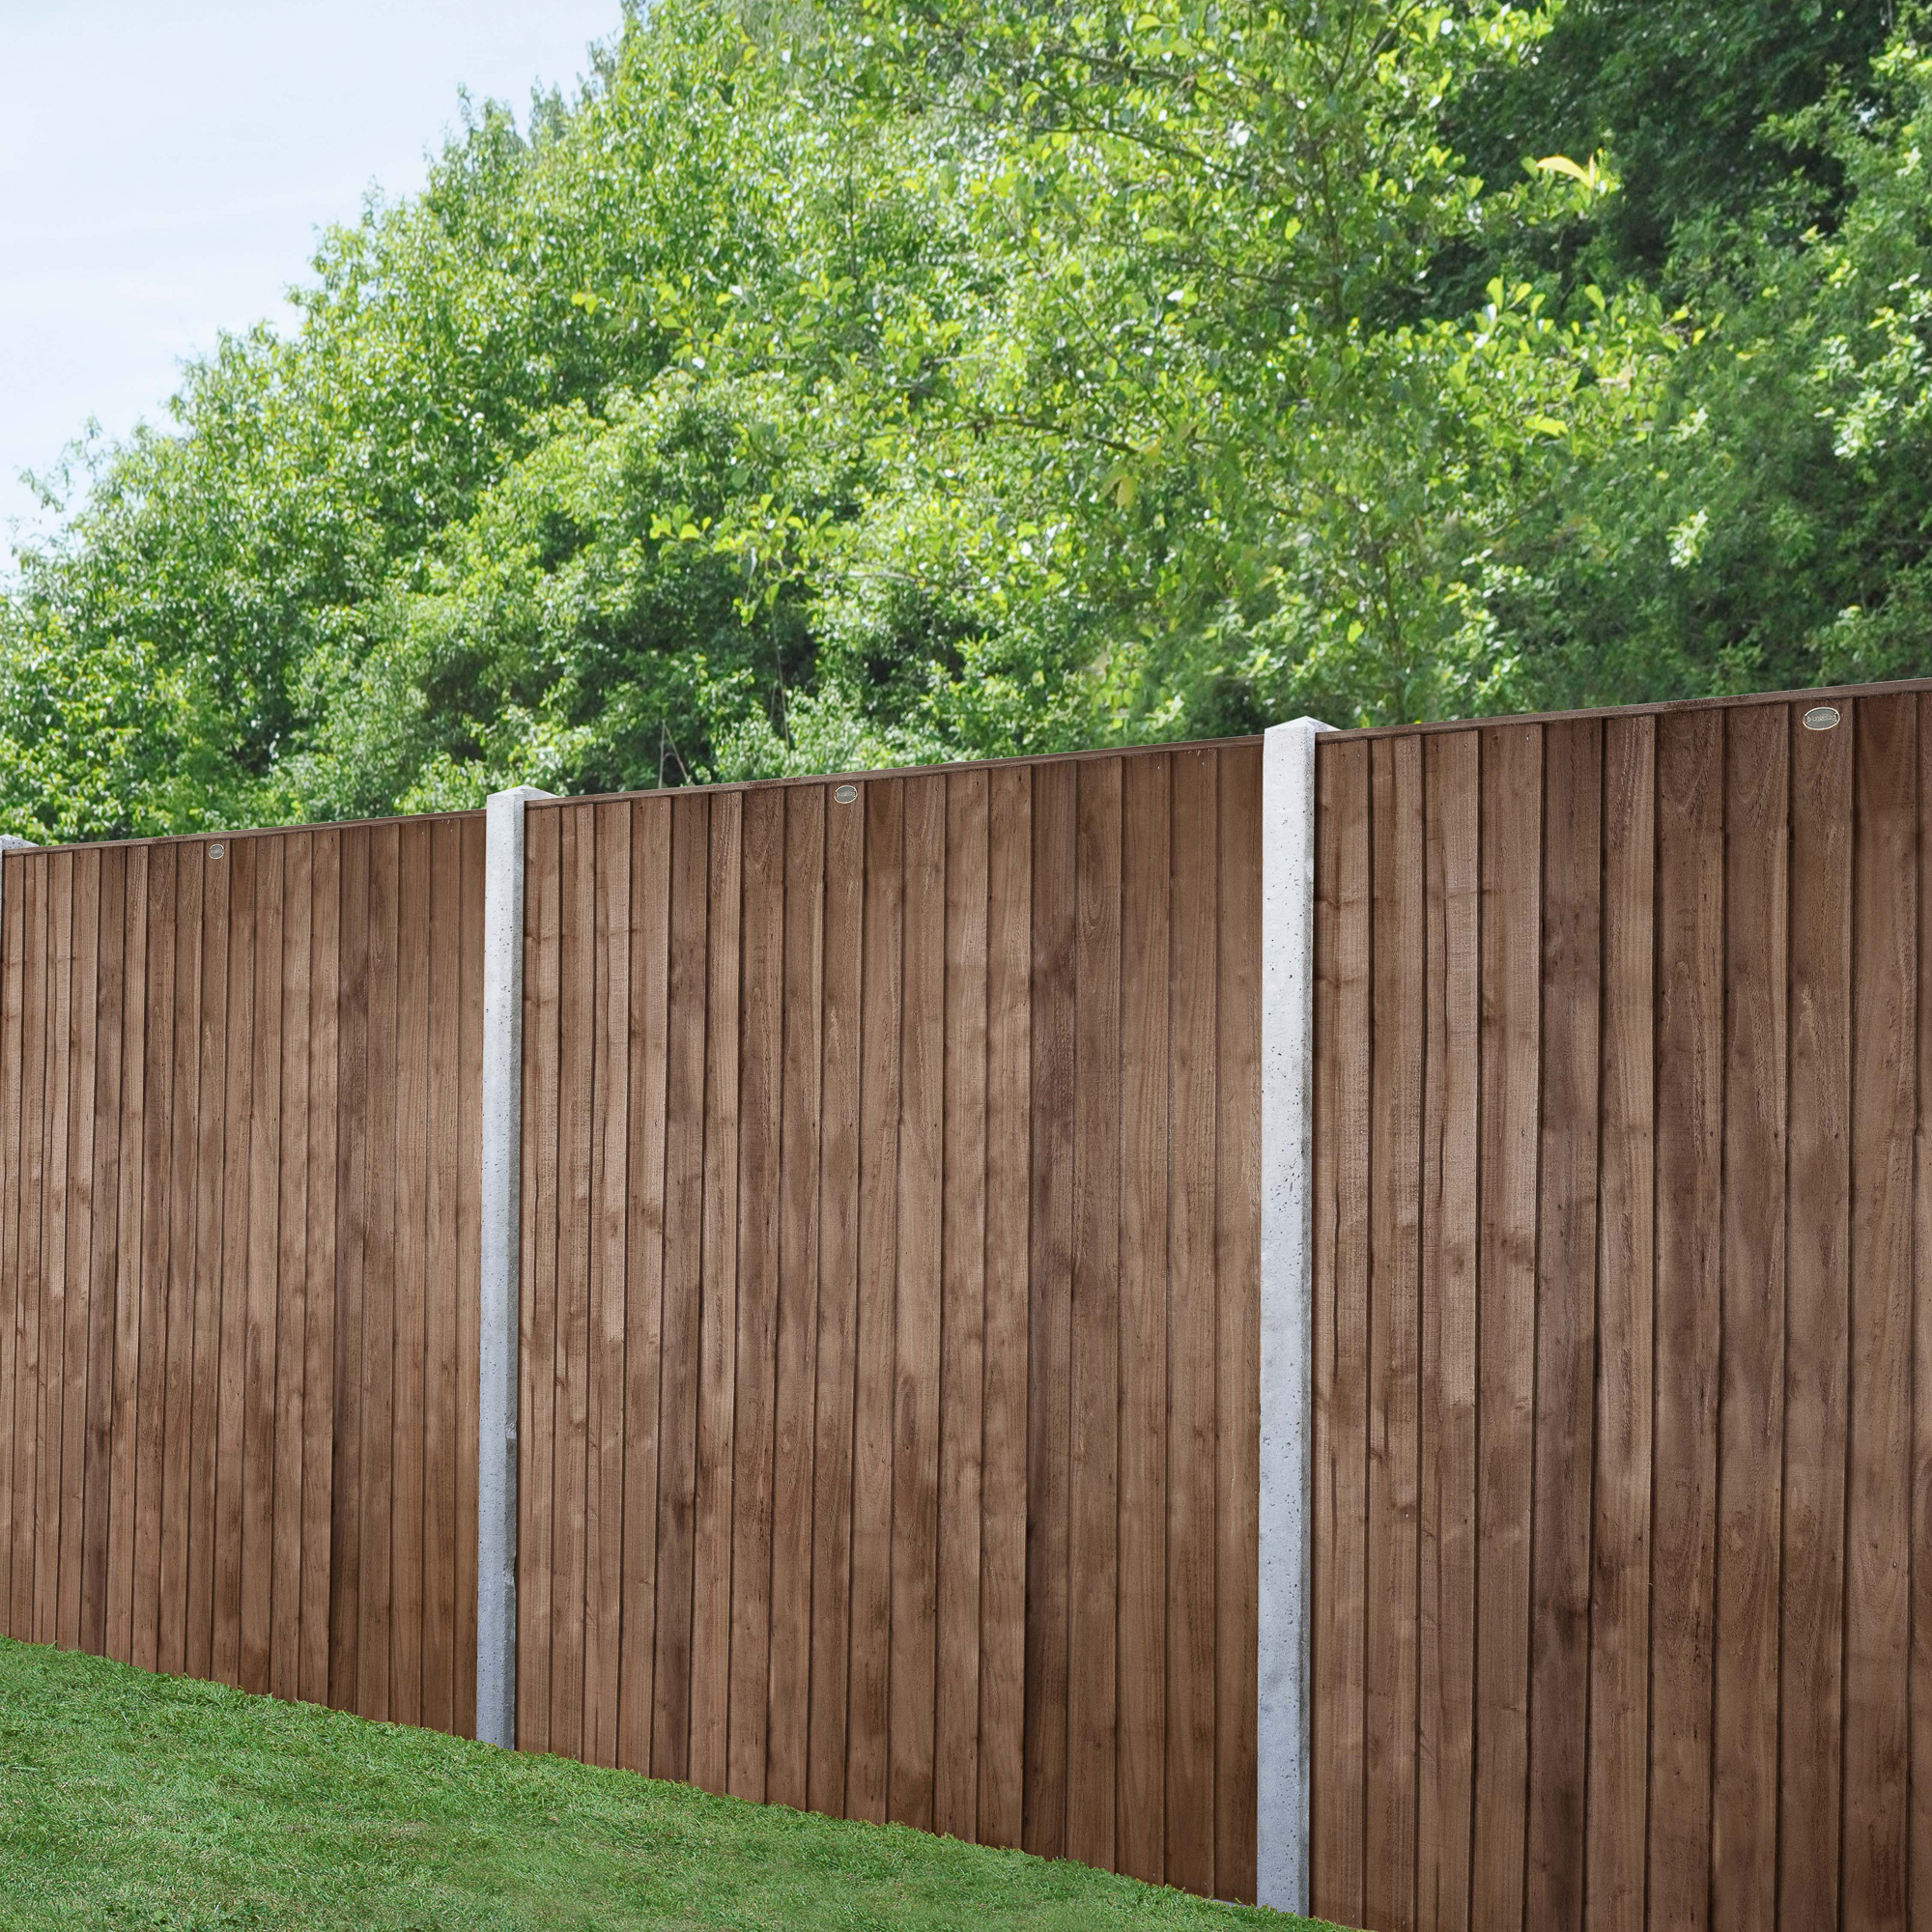 Image of Forest Garden Brown Pressure Treated Closeboard Fence Panel - 1830 x 1680mm - 6 x 5'6ft - Pack of 4